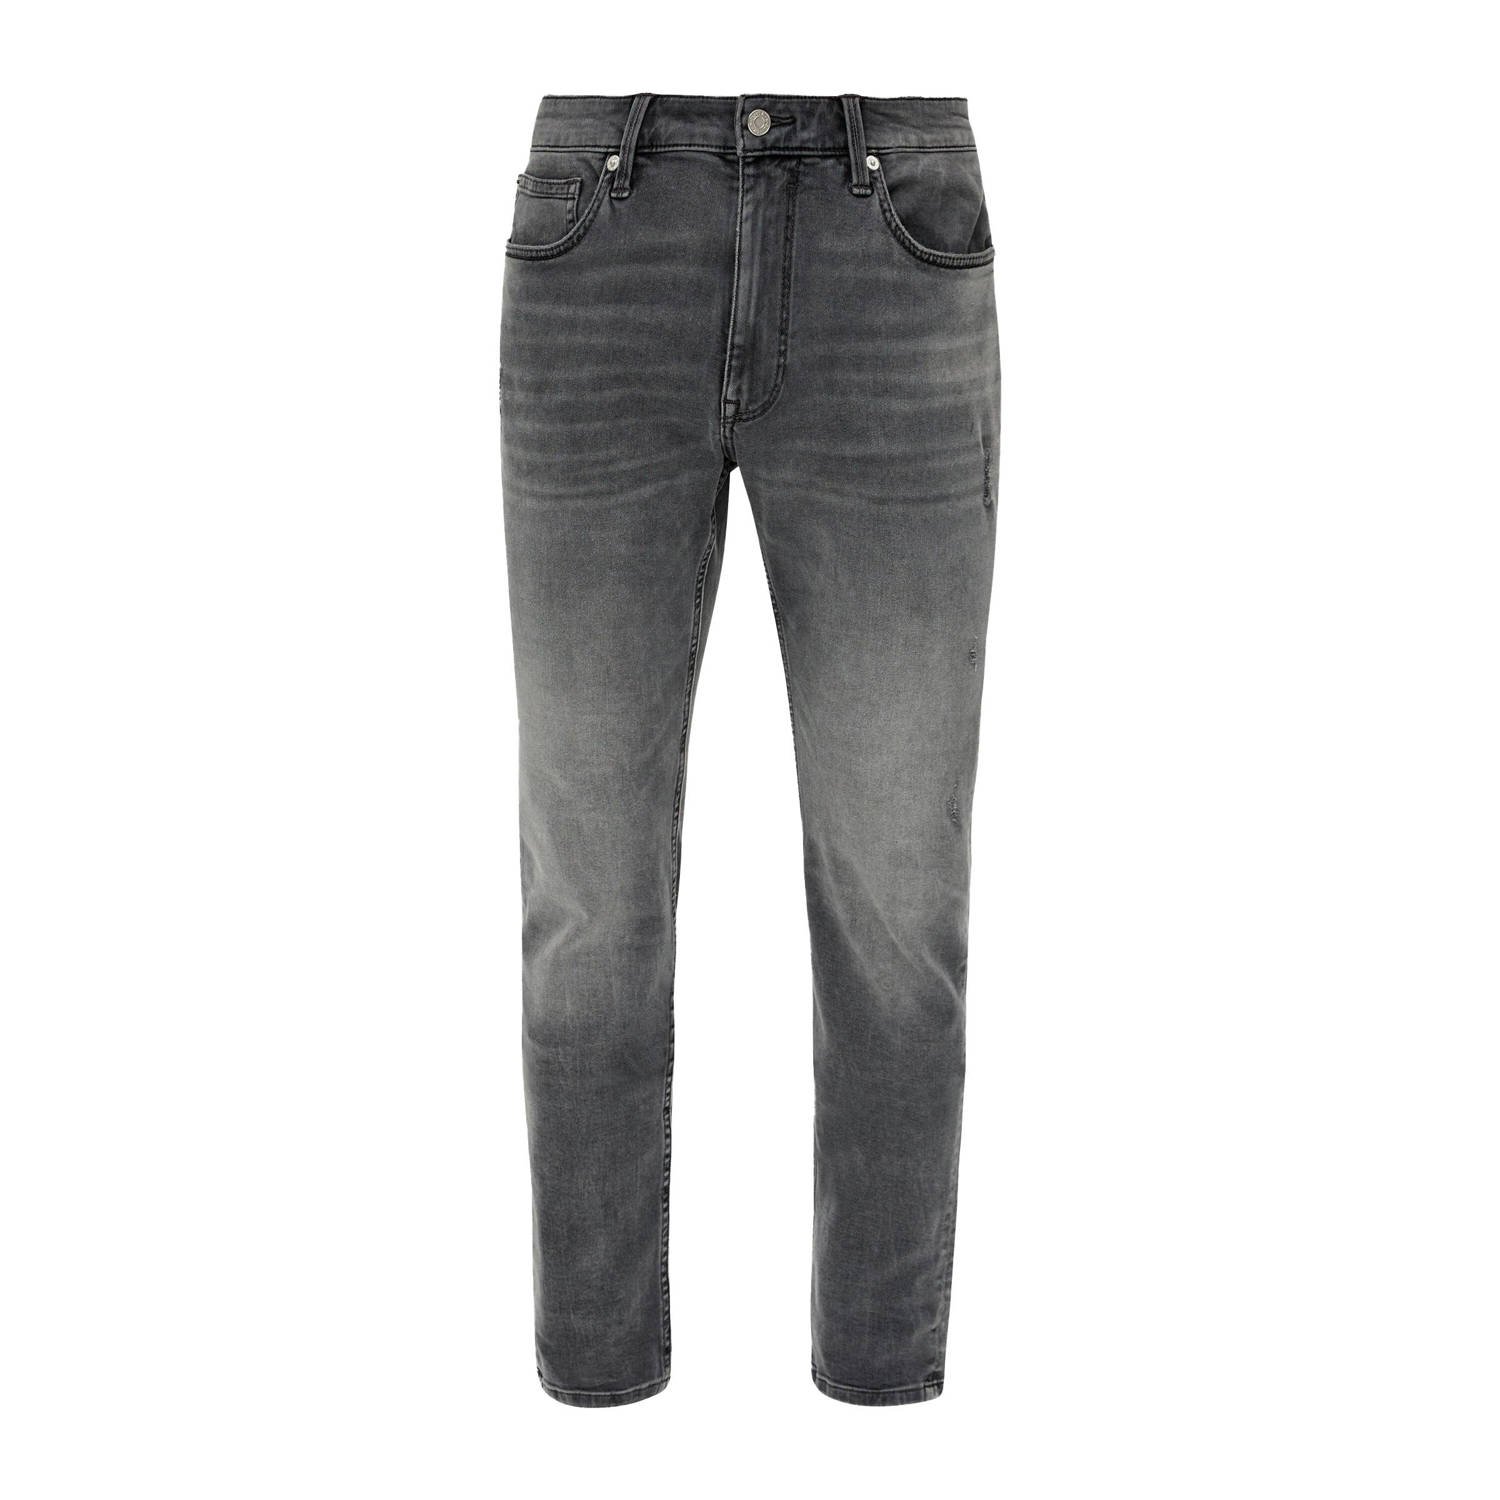 S.Oliver straight fit jeans grijs